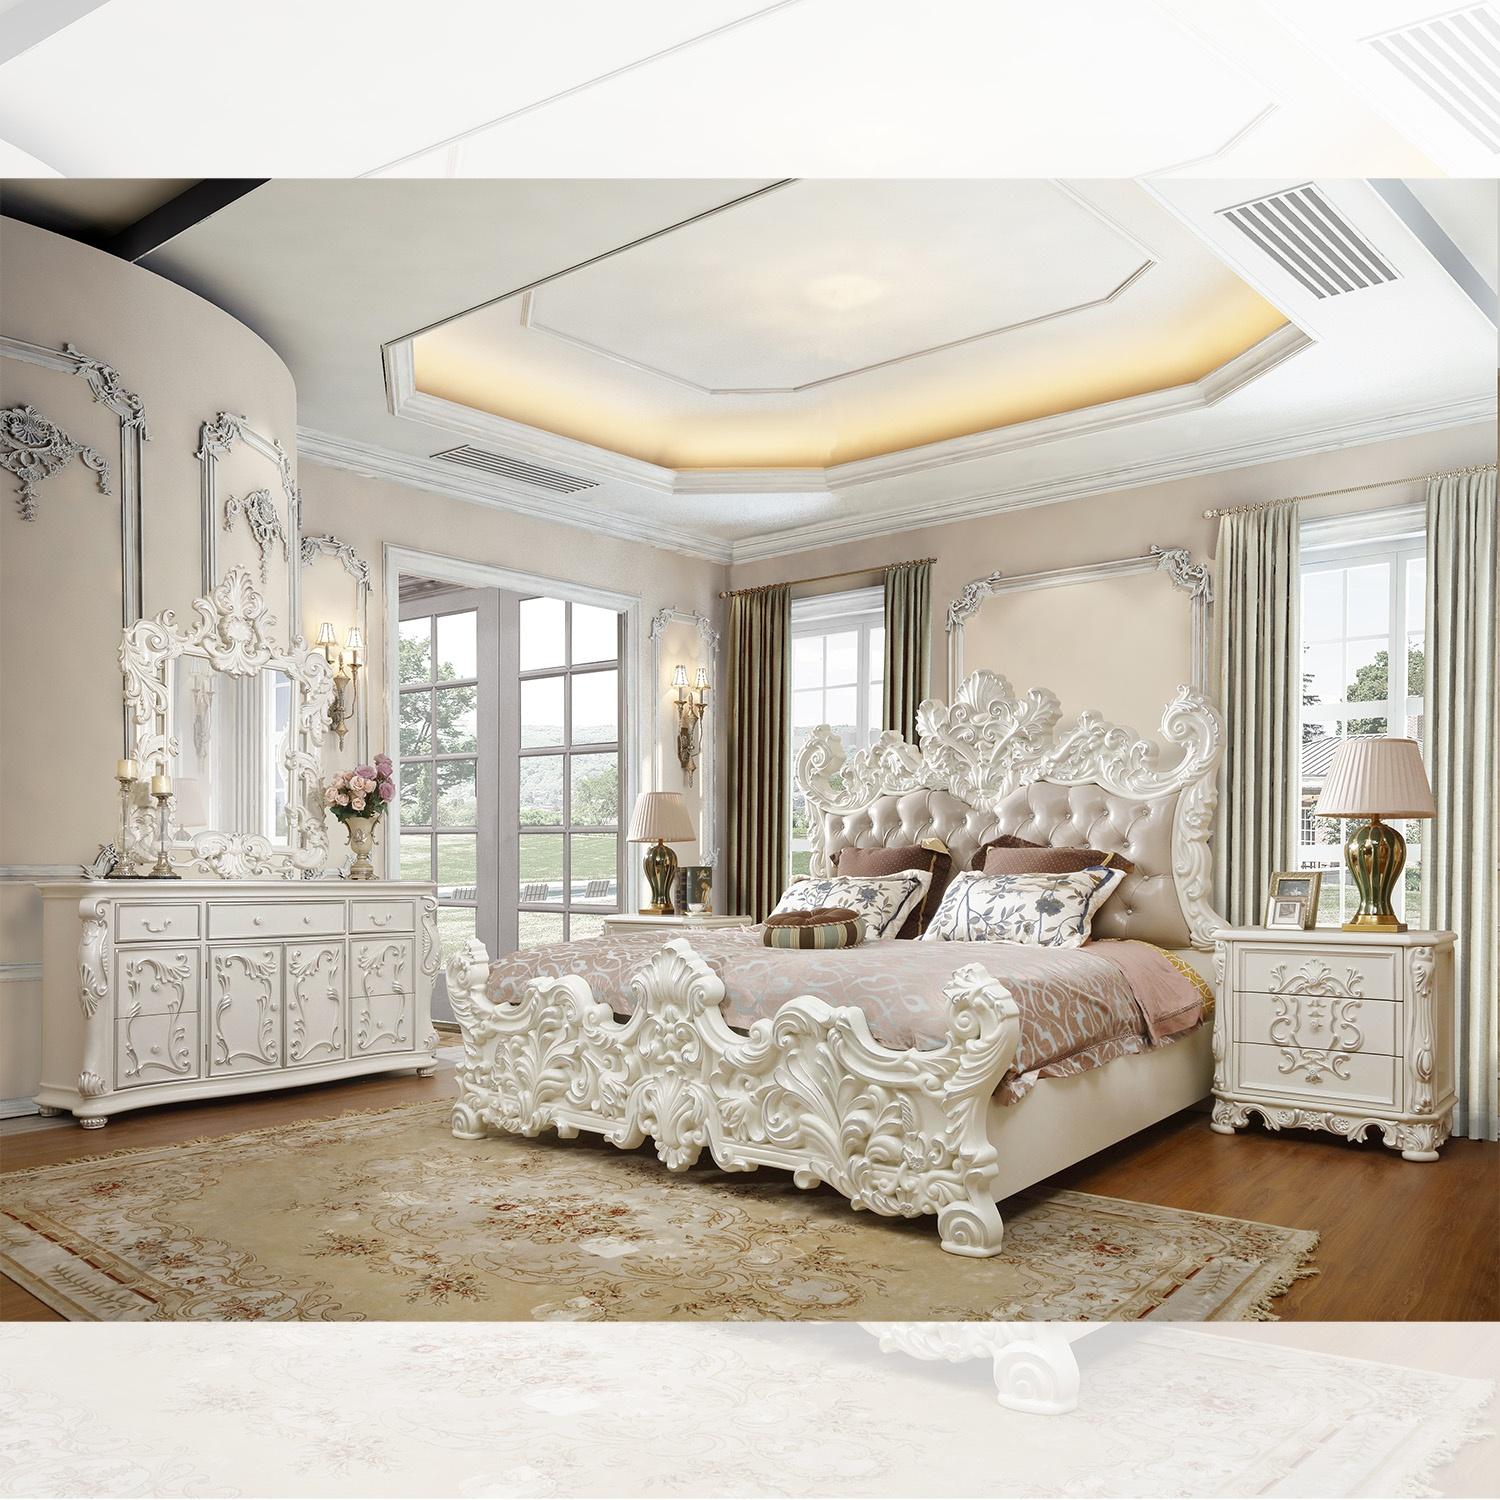 

    
Ivory & Silver Accents CAL King Bedroom Set 5Pcs Carved Wood Homey Design HD-8008I
